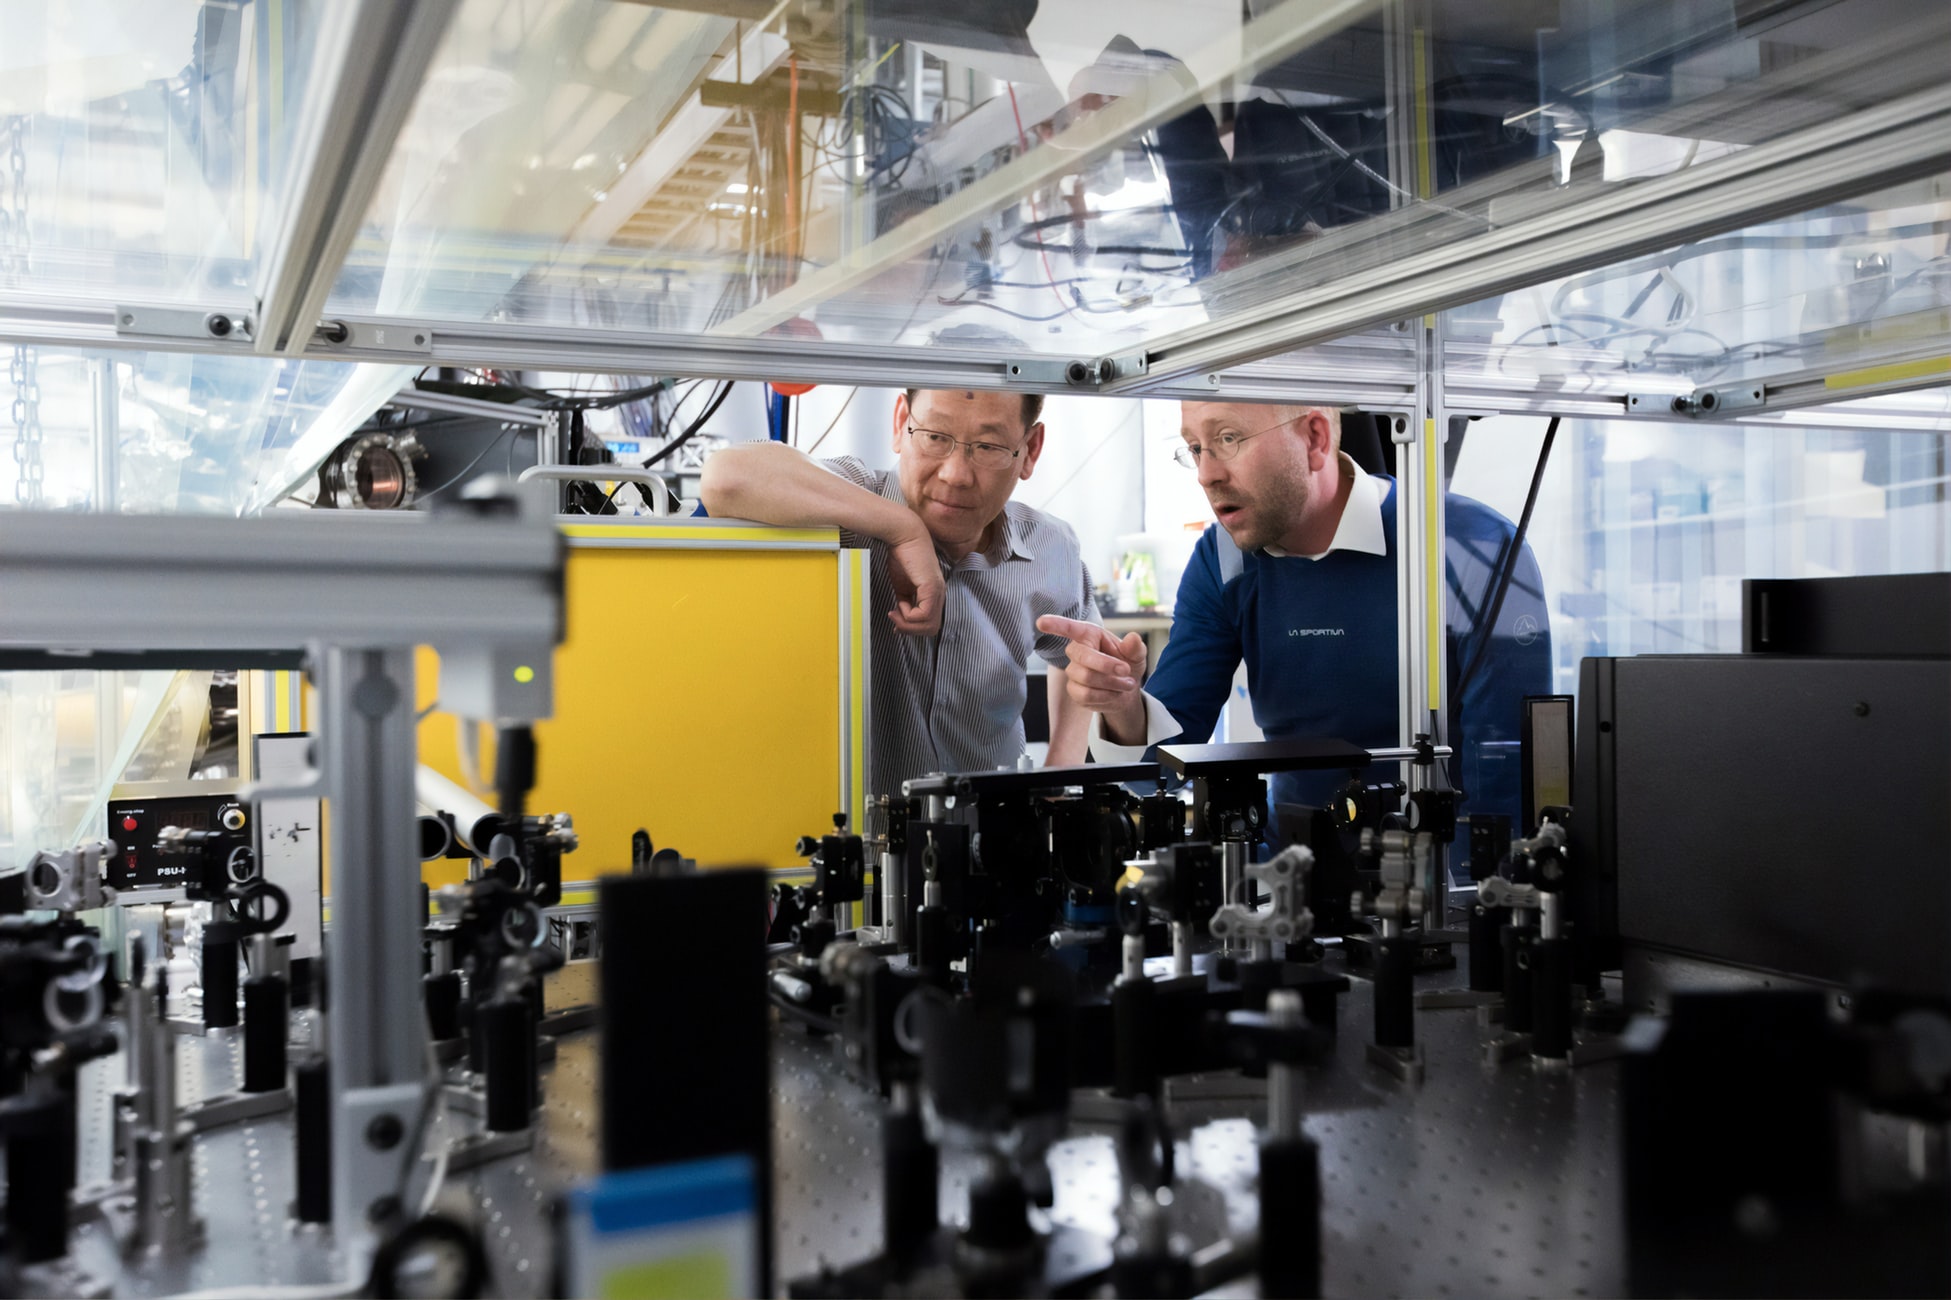 Remote monitoring of machinery and devices is a groundbreaking opportunity for OEMs